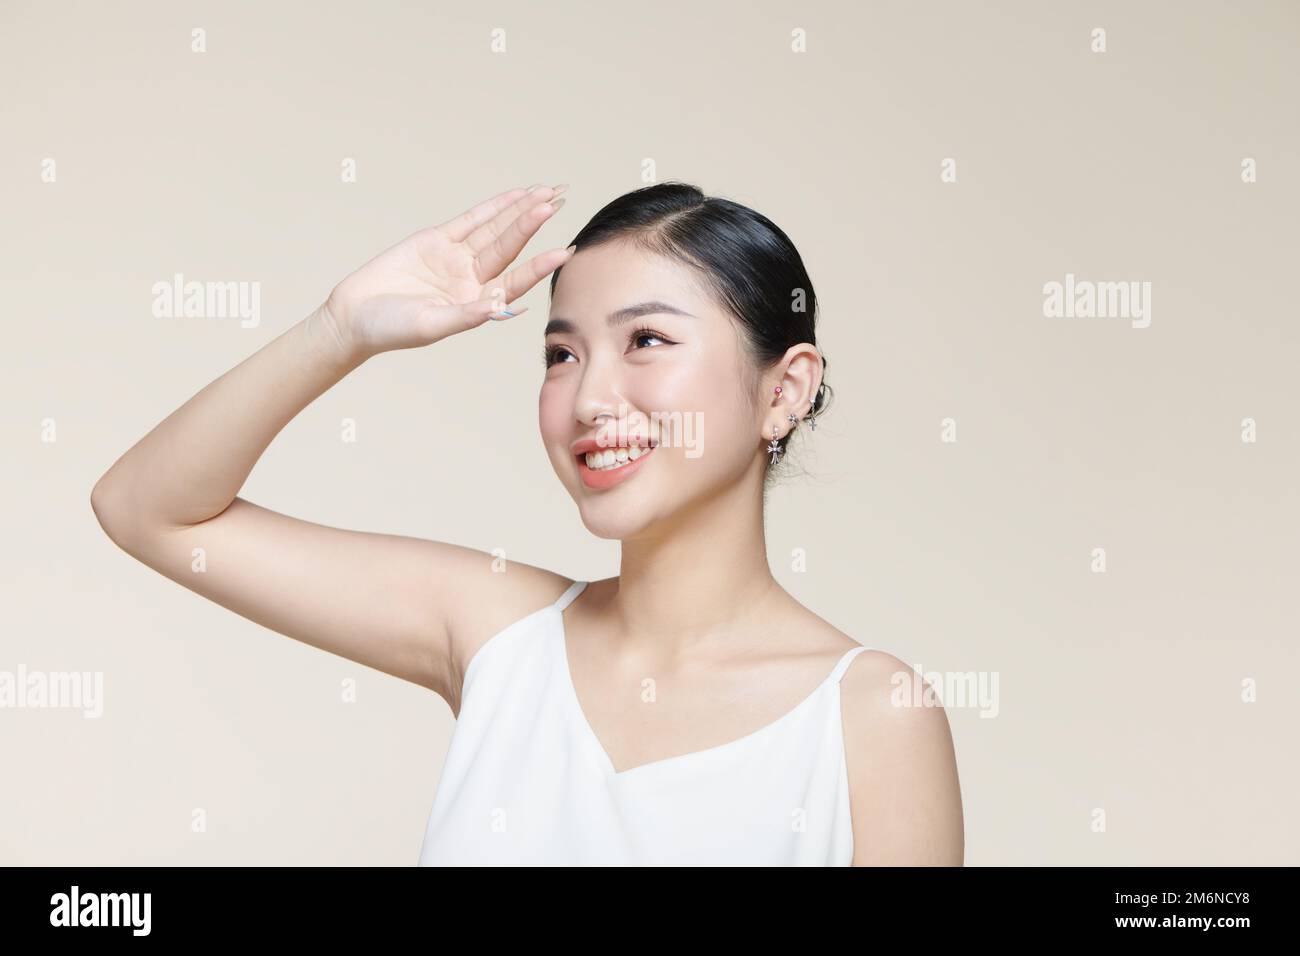 Young asian woman raising hand to covering her face from sunlight against a beige background Stock Photo